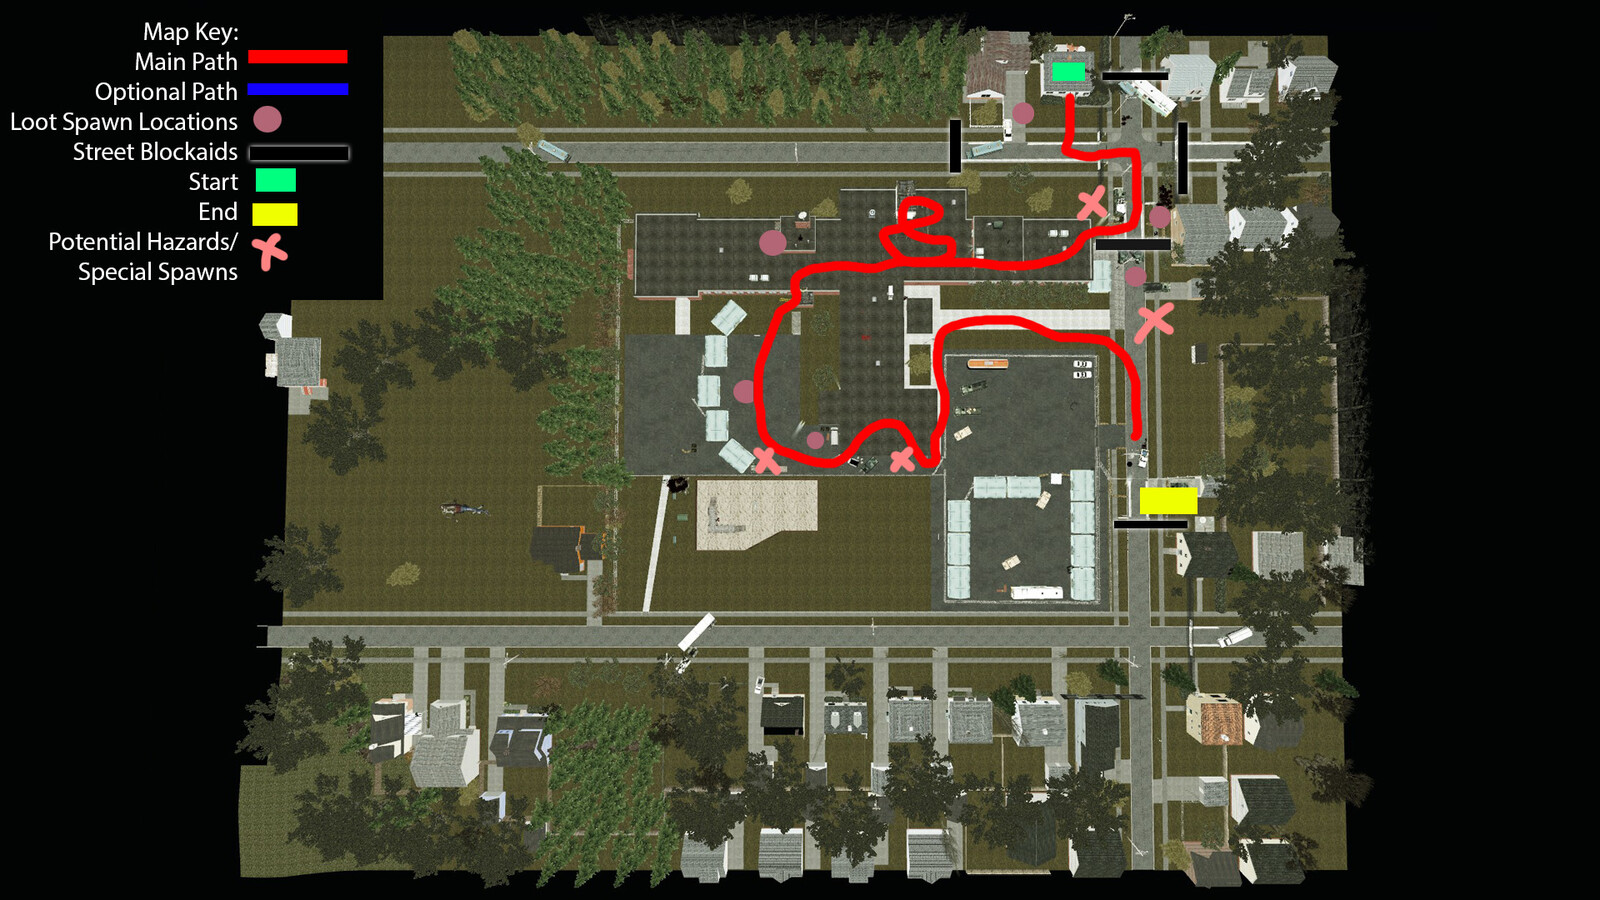 Top down view of the School level. Players must follow the red path to reach the safe house, but there are several areas around where players can explore to find additional supplies and story elements. 